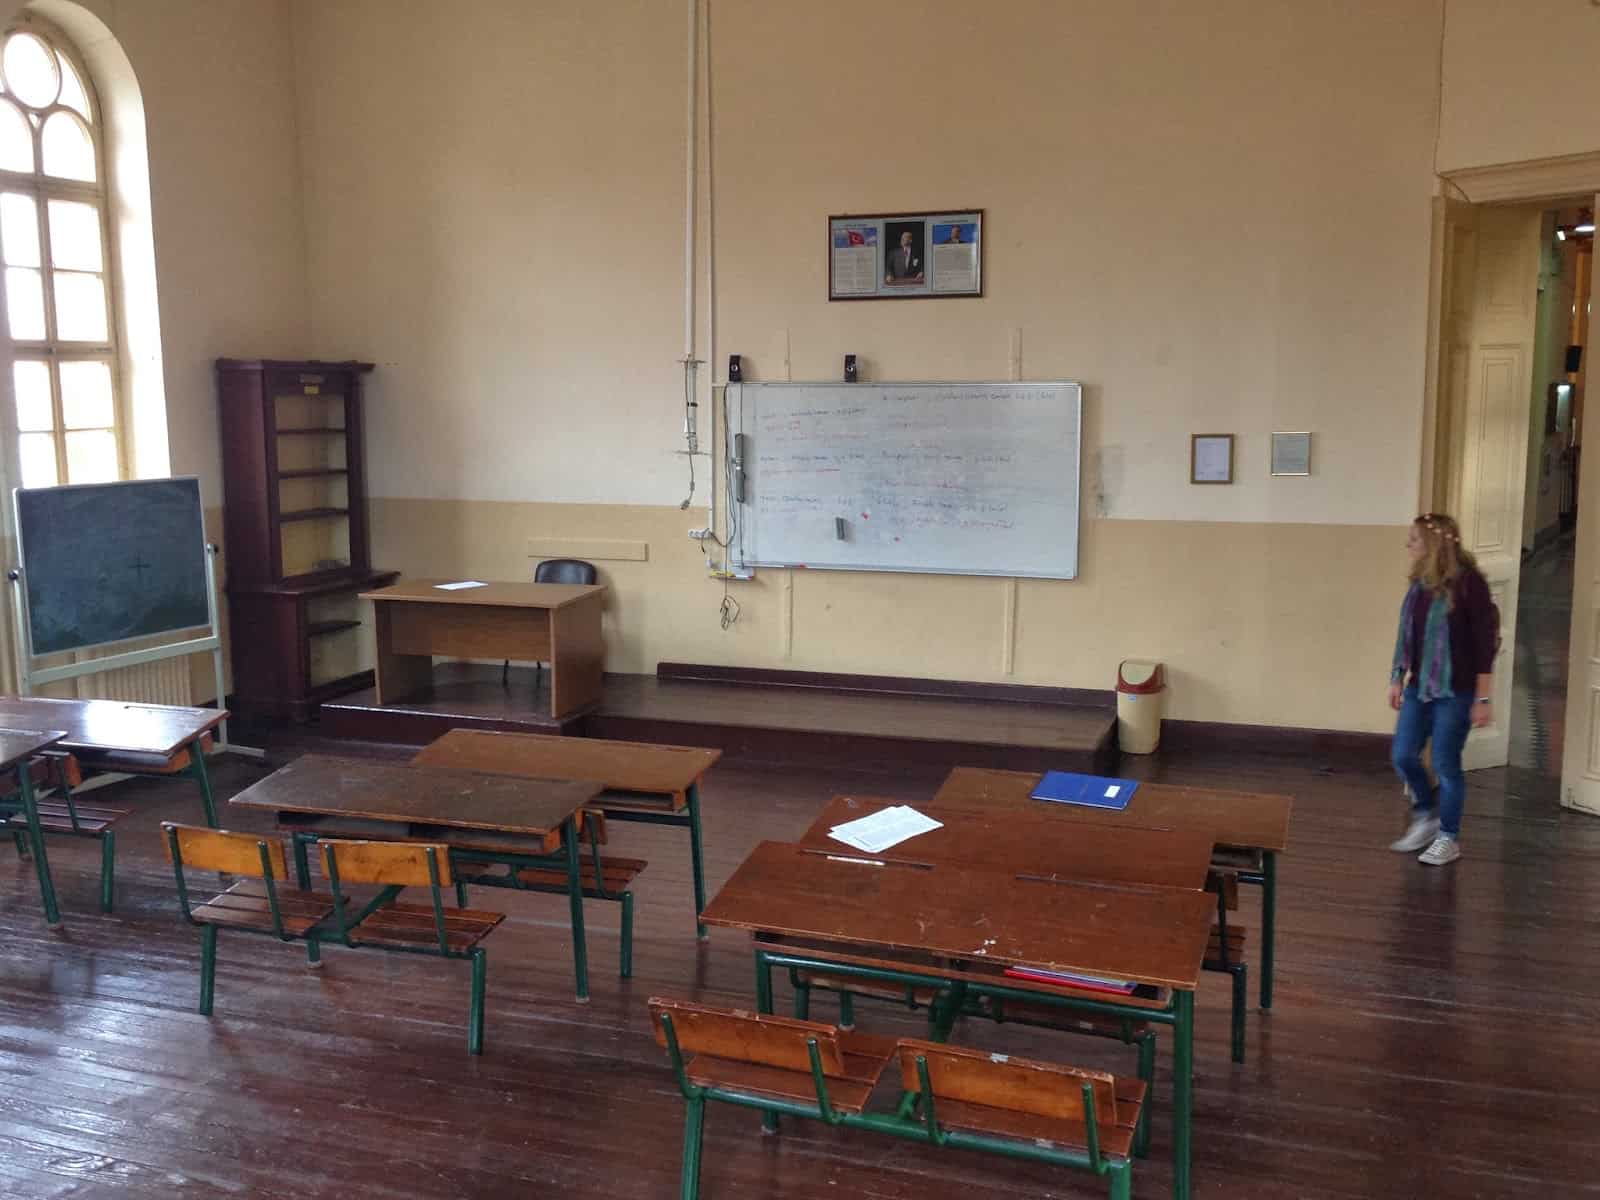 Classroom at Great School of the Nation in Fener, Istanbul, Turkey